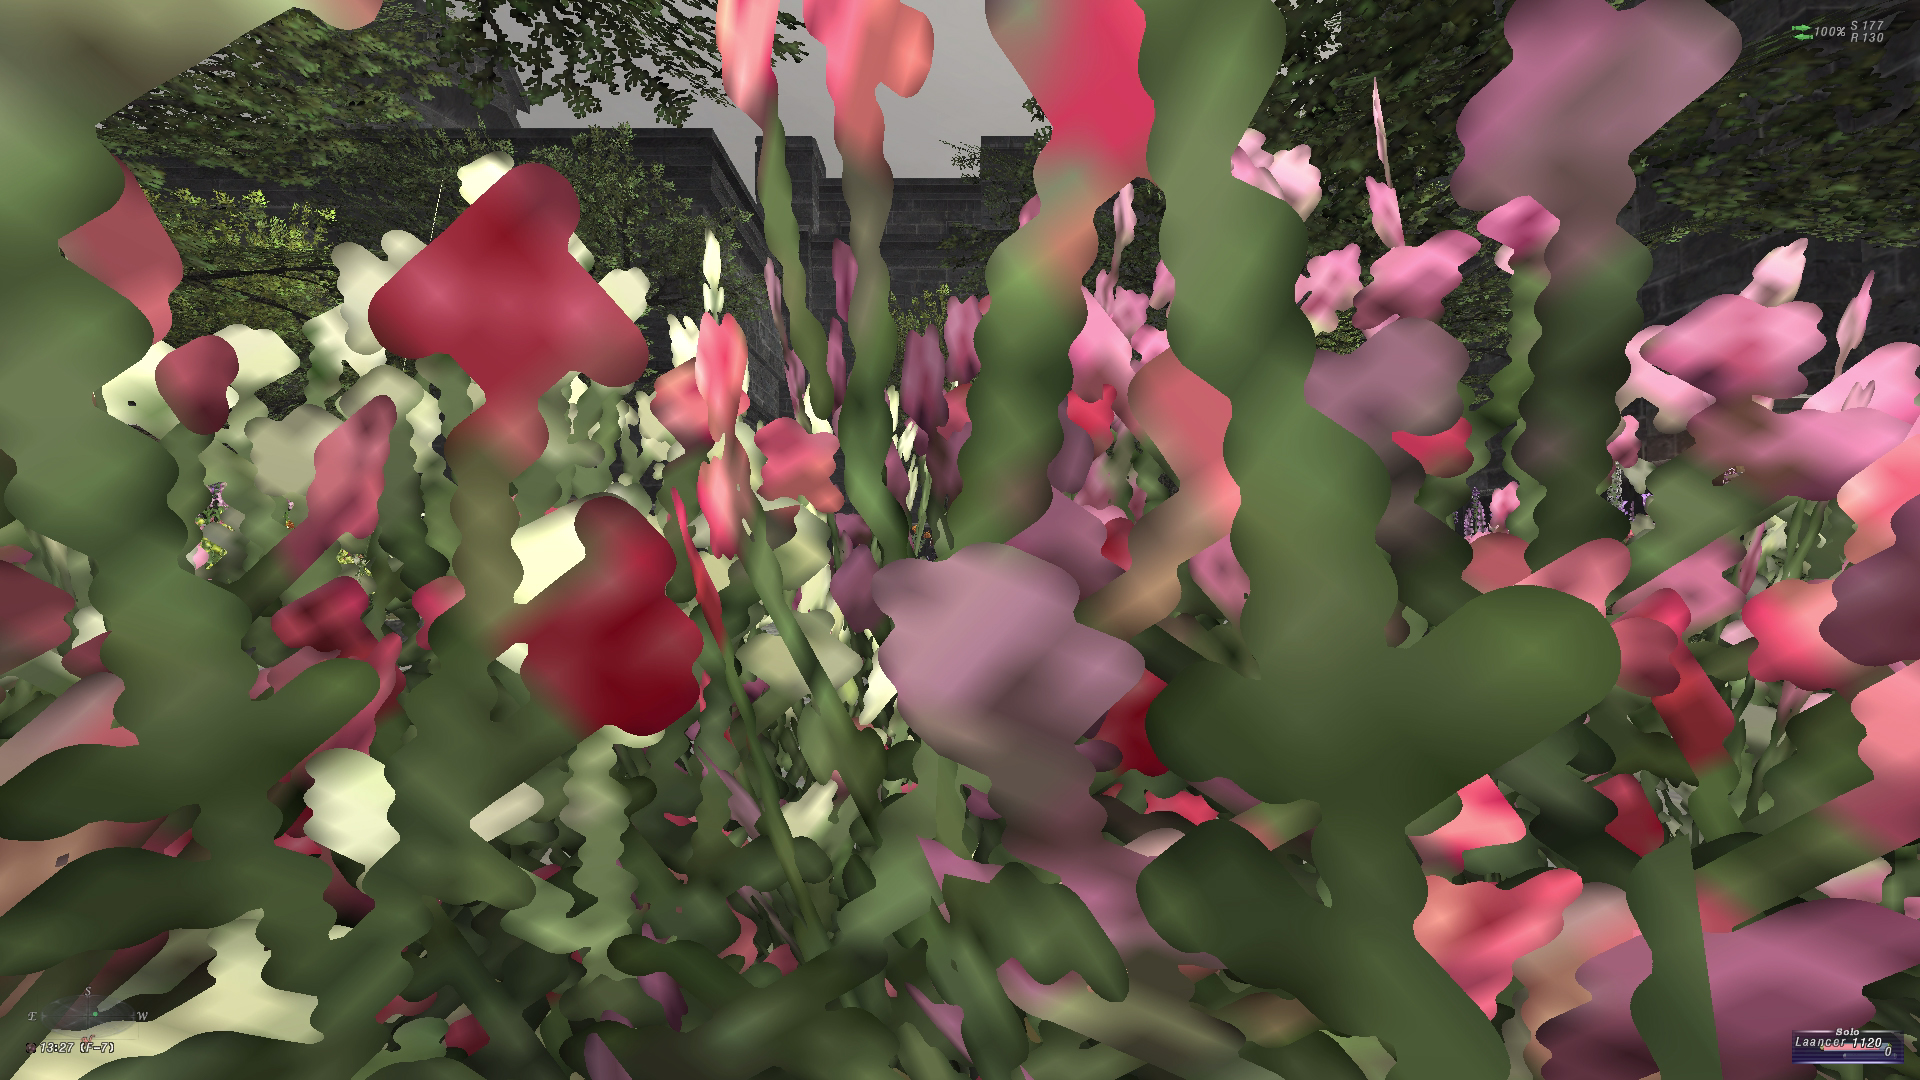 closeup of pixelated garden flowers in videogame.